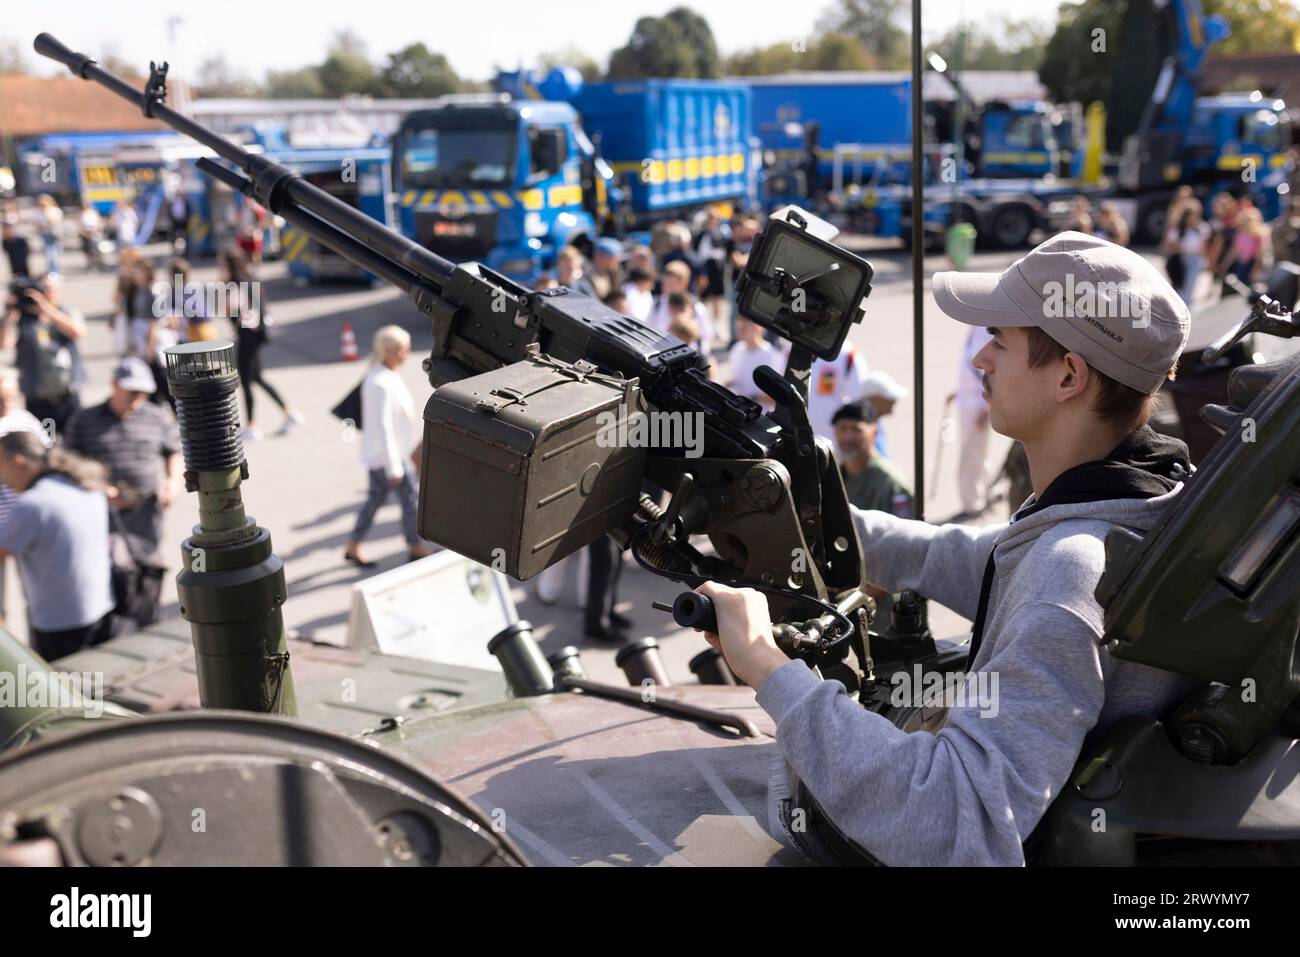 Gornja Radgona, Slovenia. 21st Sep, 2023. A visitor experiences a Tank M-84 during the SOBRA international fair in Gornja Radgona, Slovenia, on Sept. 21, 2023. Slovenia will increase its defense budget, the country's Minister of Defense Marjan Sarec said at the biennial four-day SOBRA international fair focusing on the areas of defense, security, protection and rescue that opened on Thursday. Credit: Zeljko Stevanic/Xinhua/Alamy Live News Stock Photo